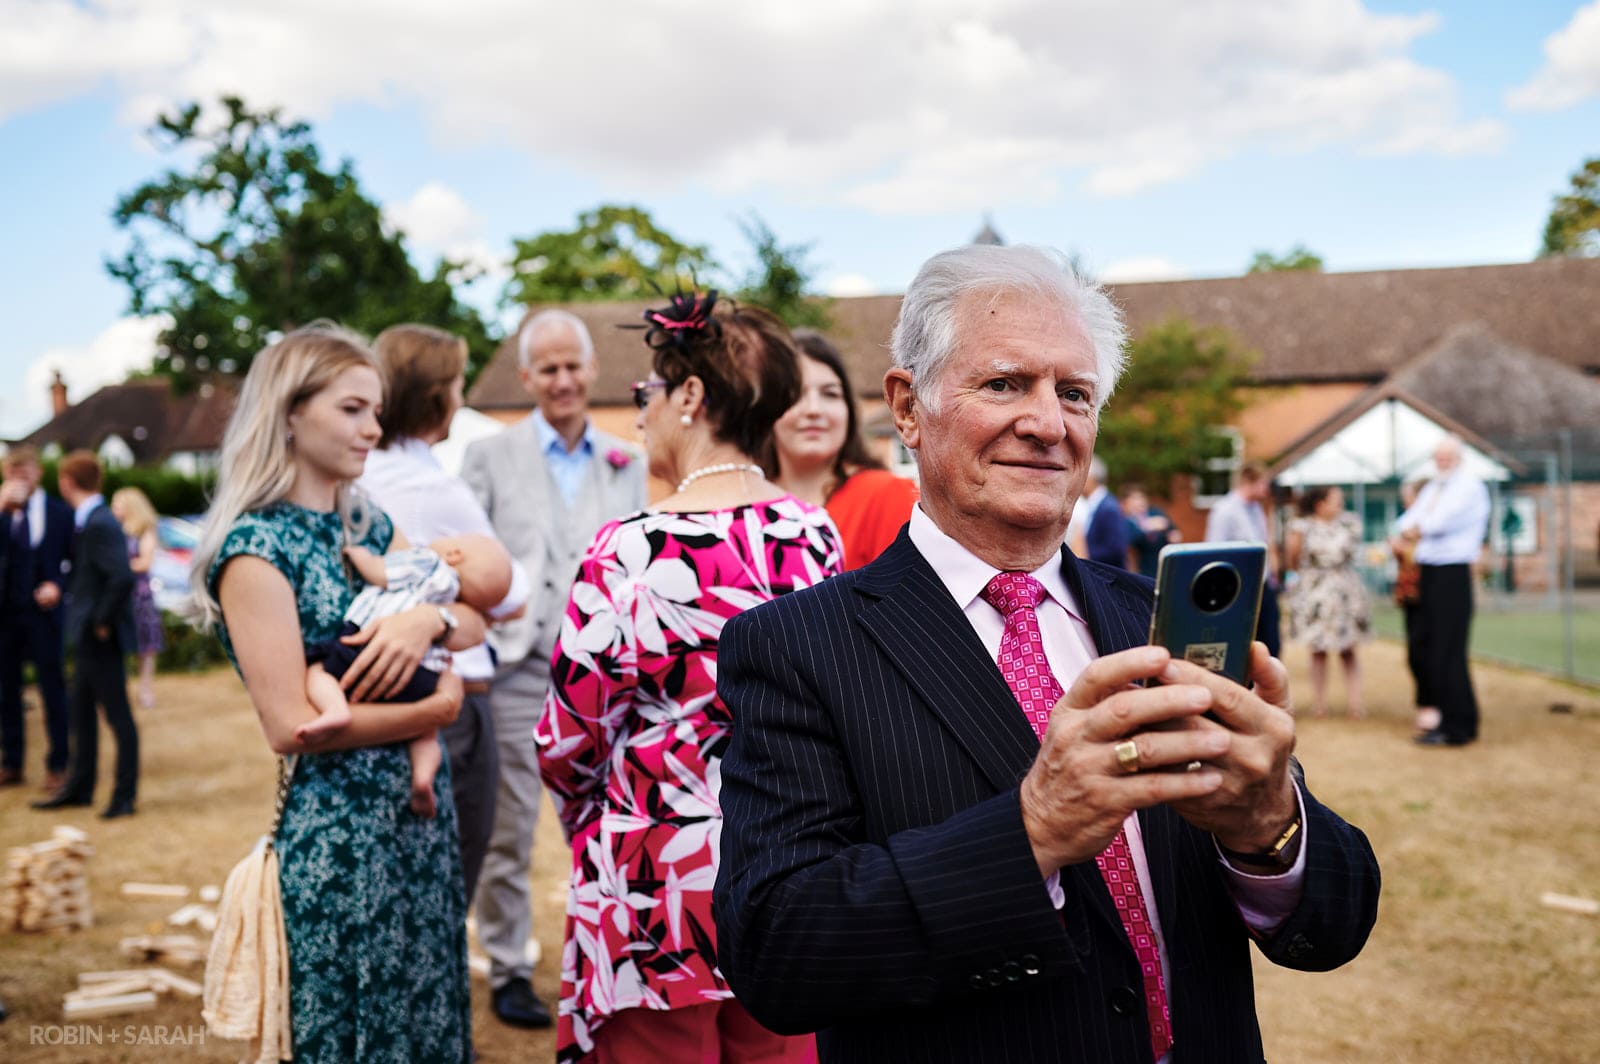 Wedding guest takes photo on his phone at village hall wedding